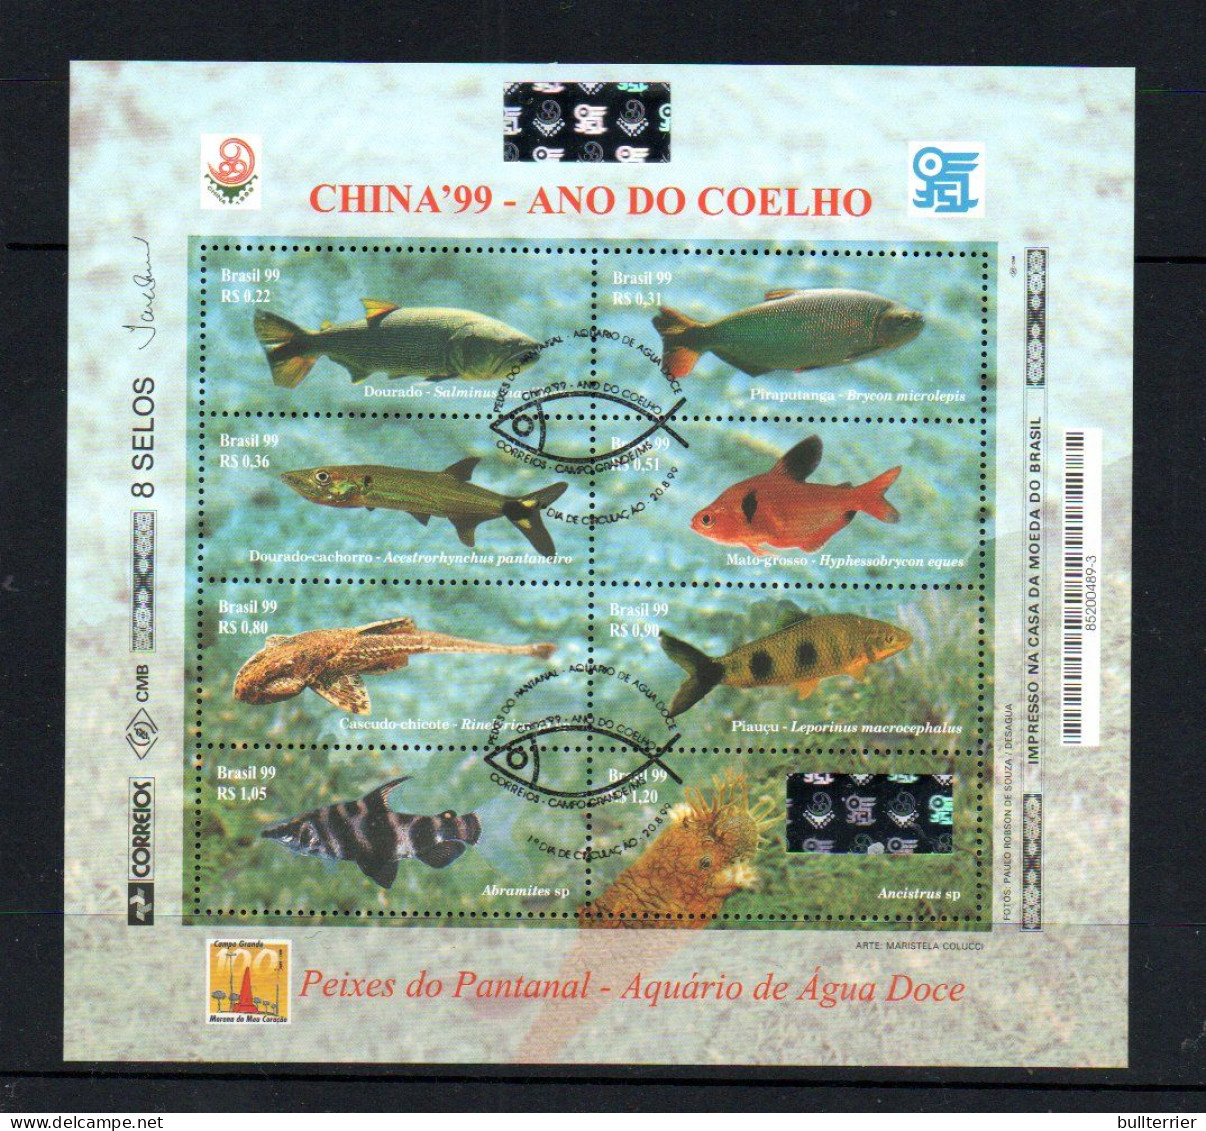 HOLOGRAMS - BRAZIL - 1999- CHINA EXPO FISHES SHEETLET OF 8 FINE USED - Hologrammen